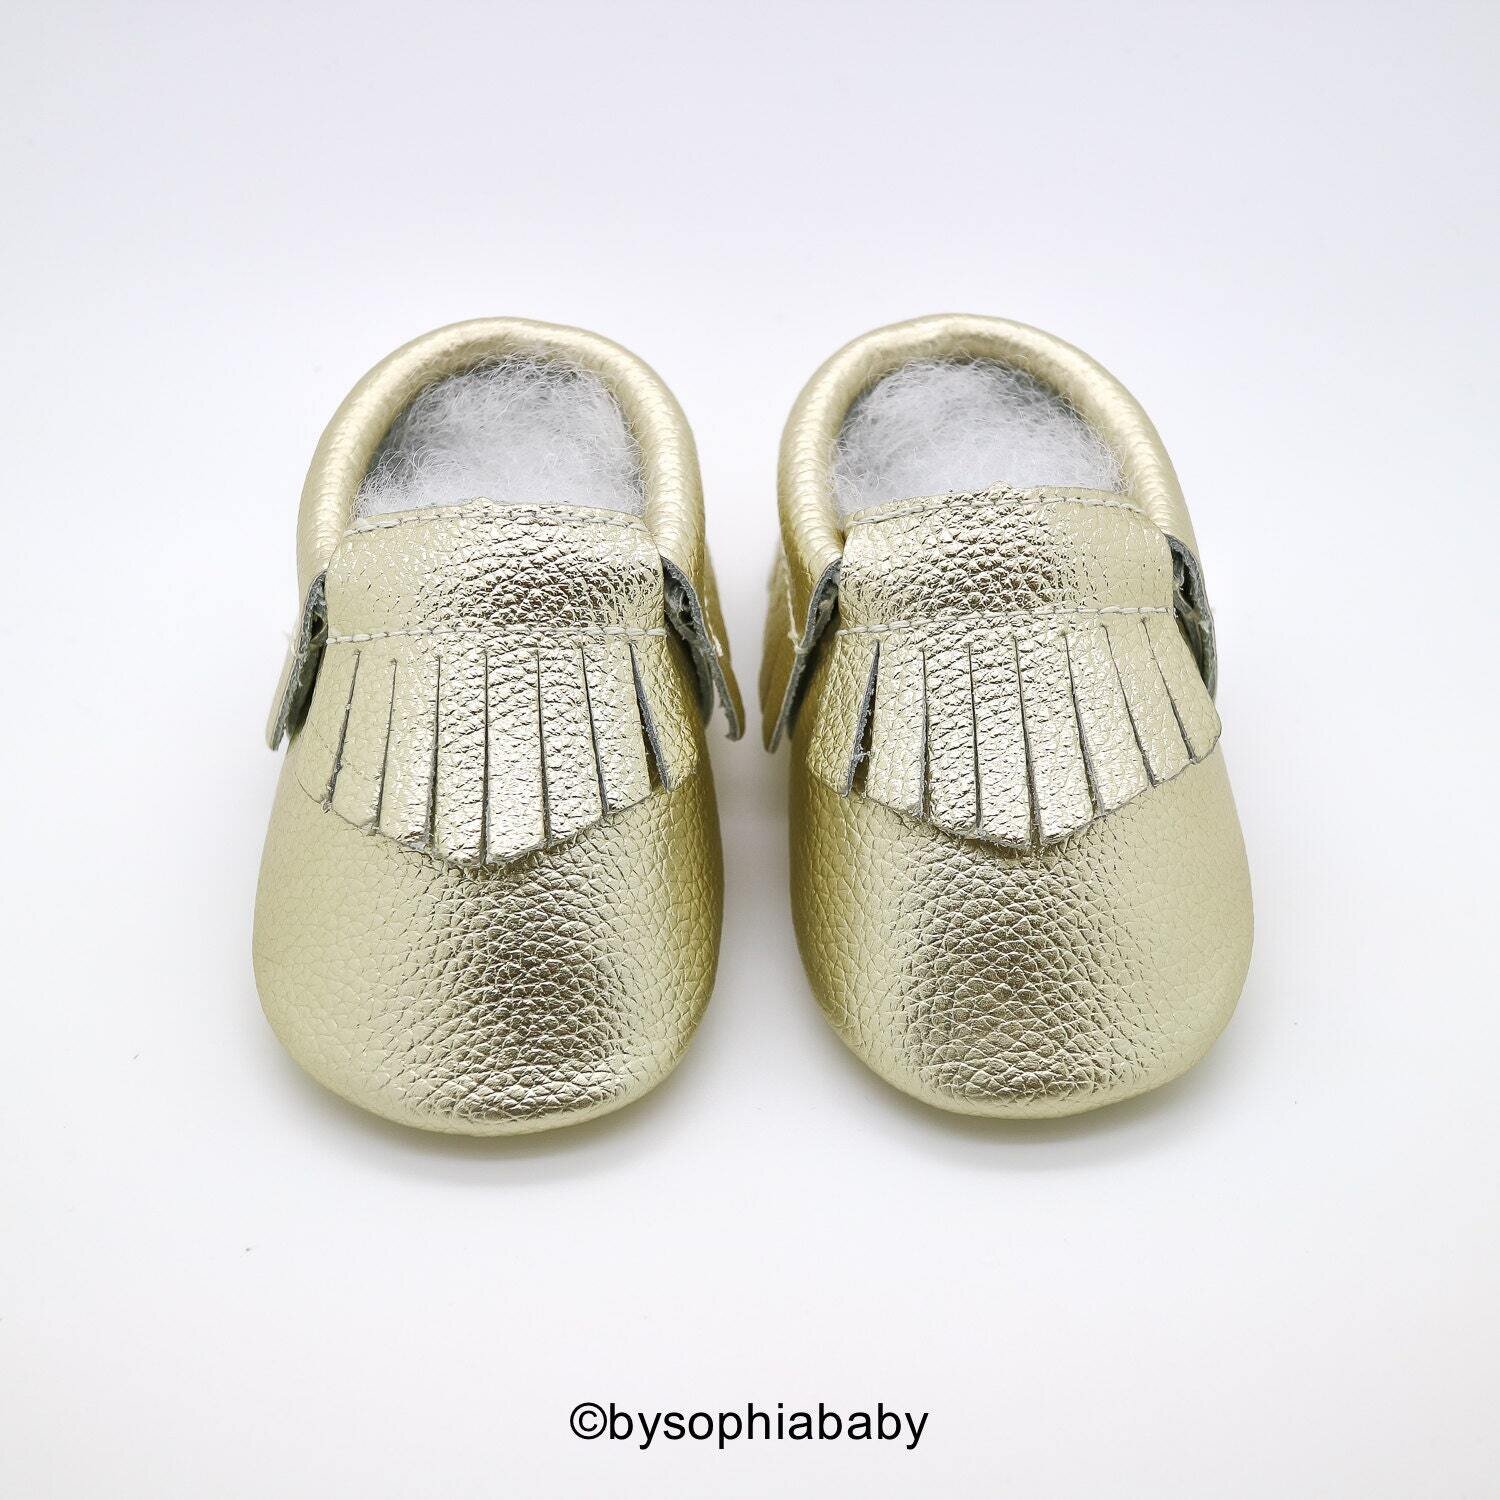 Gold Fringe Moccasins Baby Gold Moccasins Baby Leather Shoes Genuine Leather Moccs Toddler Moccasins Baby Moccs Baby Shower Gift